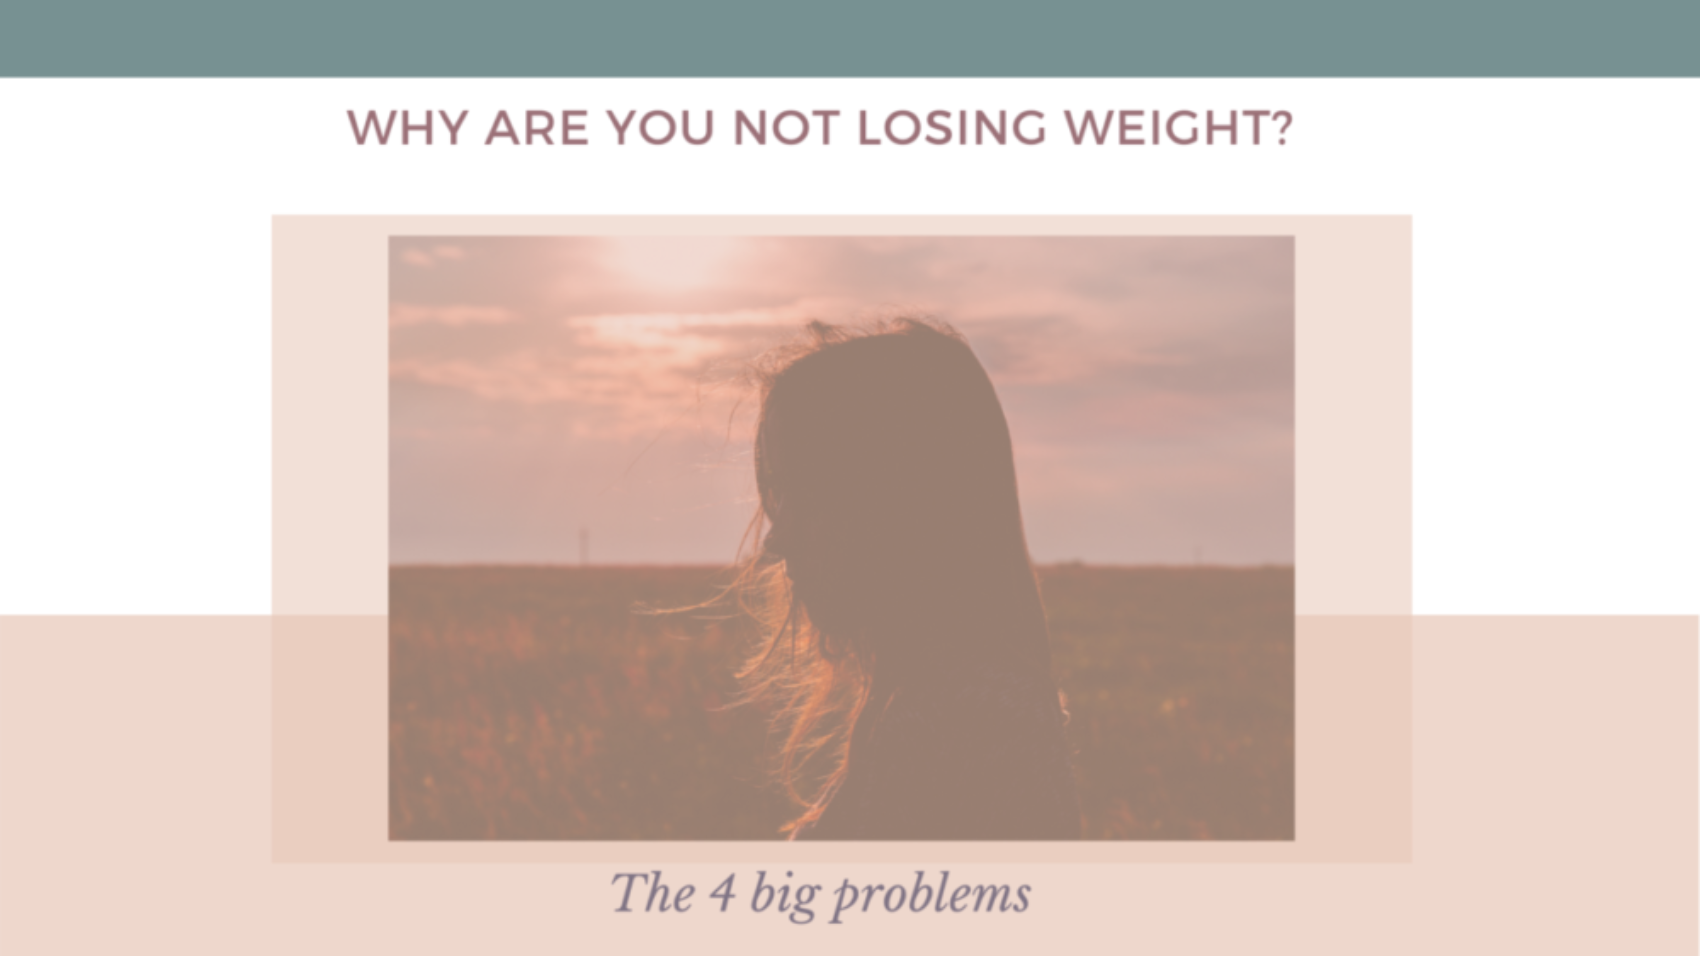 Why are you not losing weight? The 4 big problems